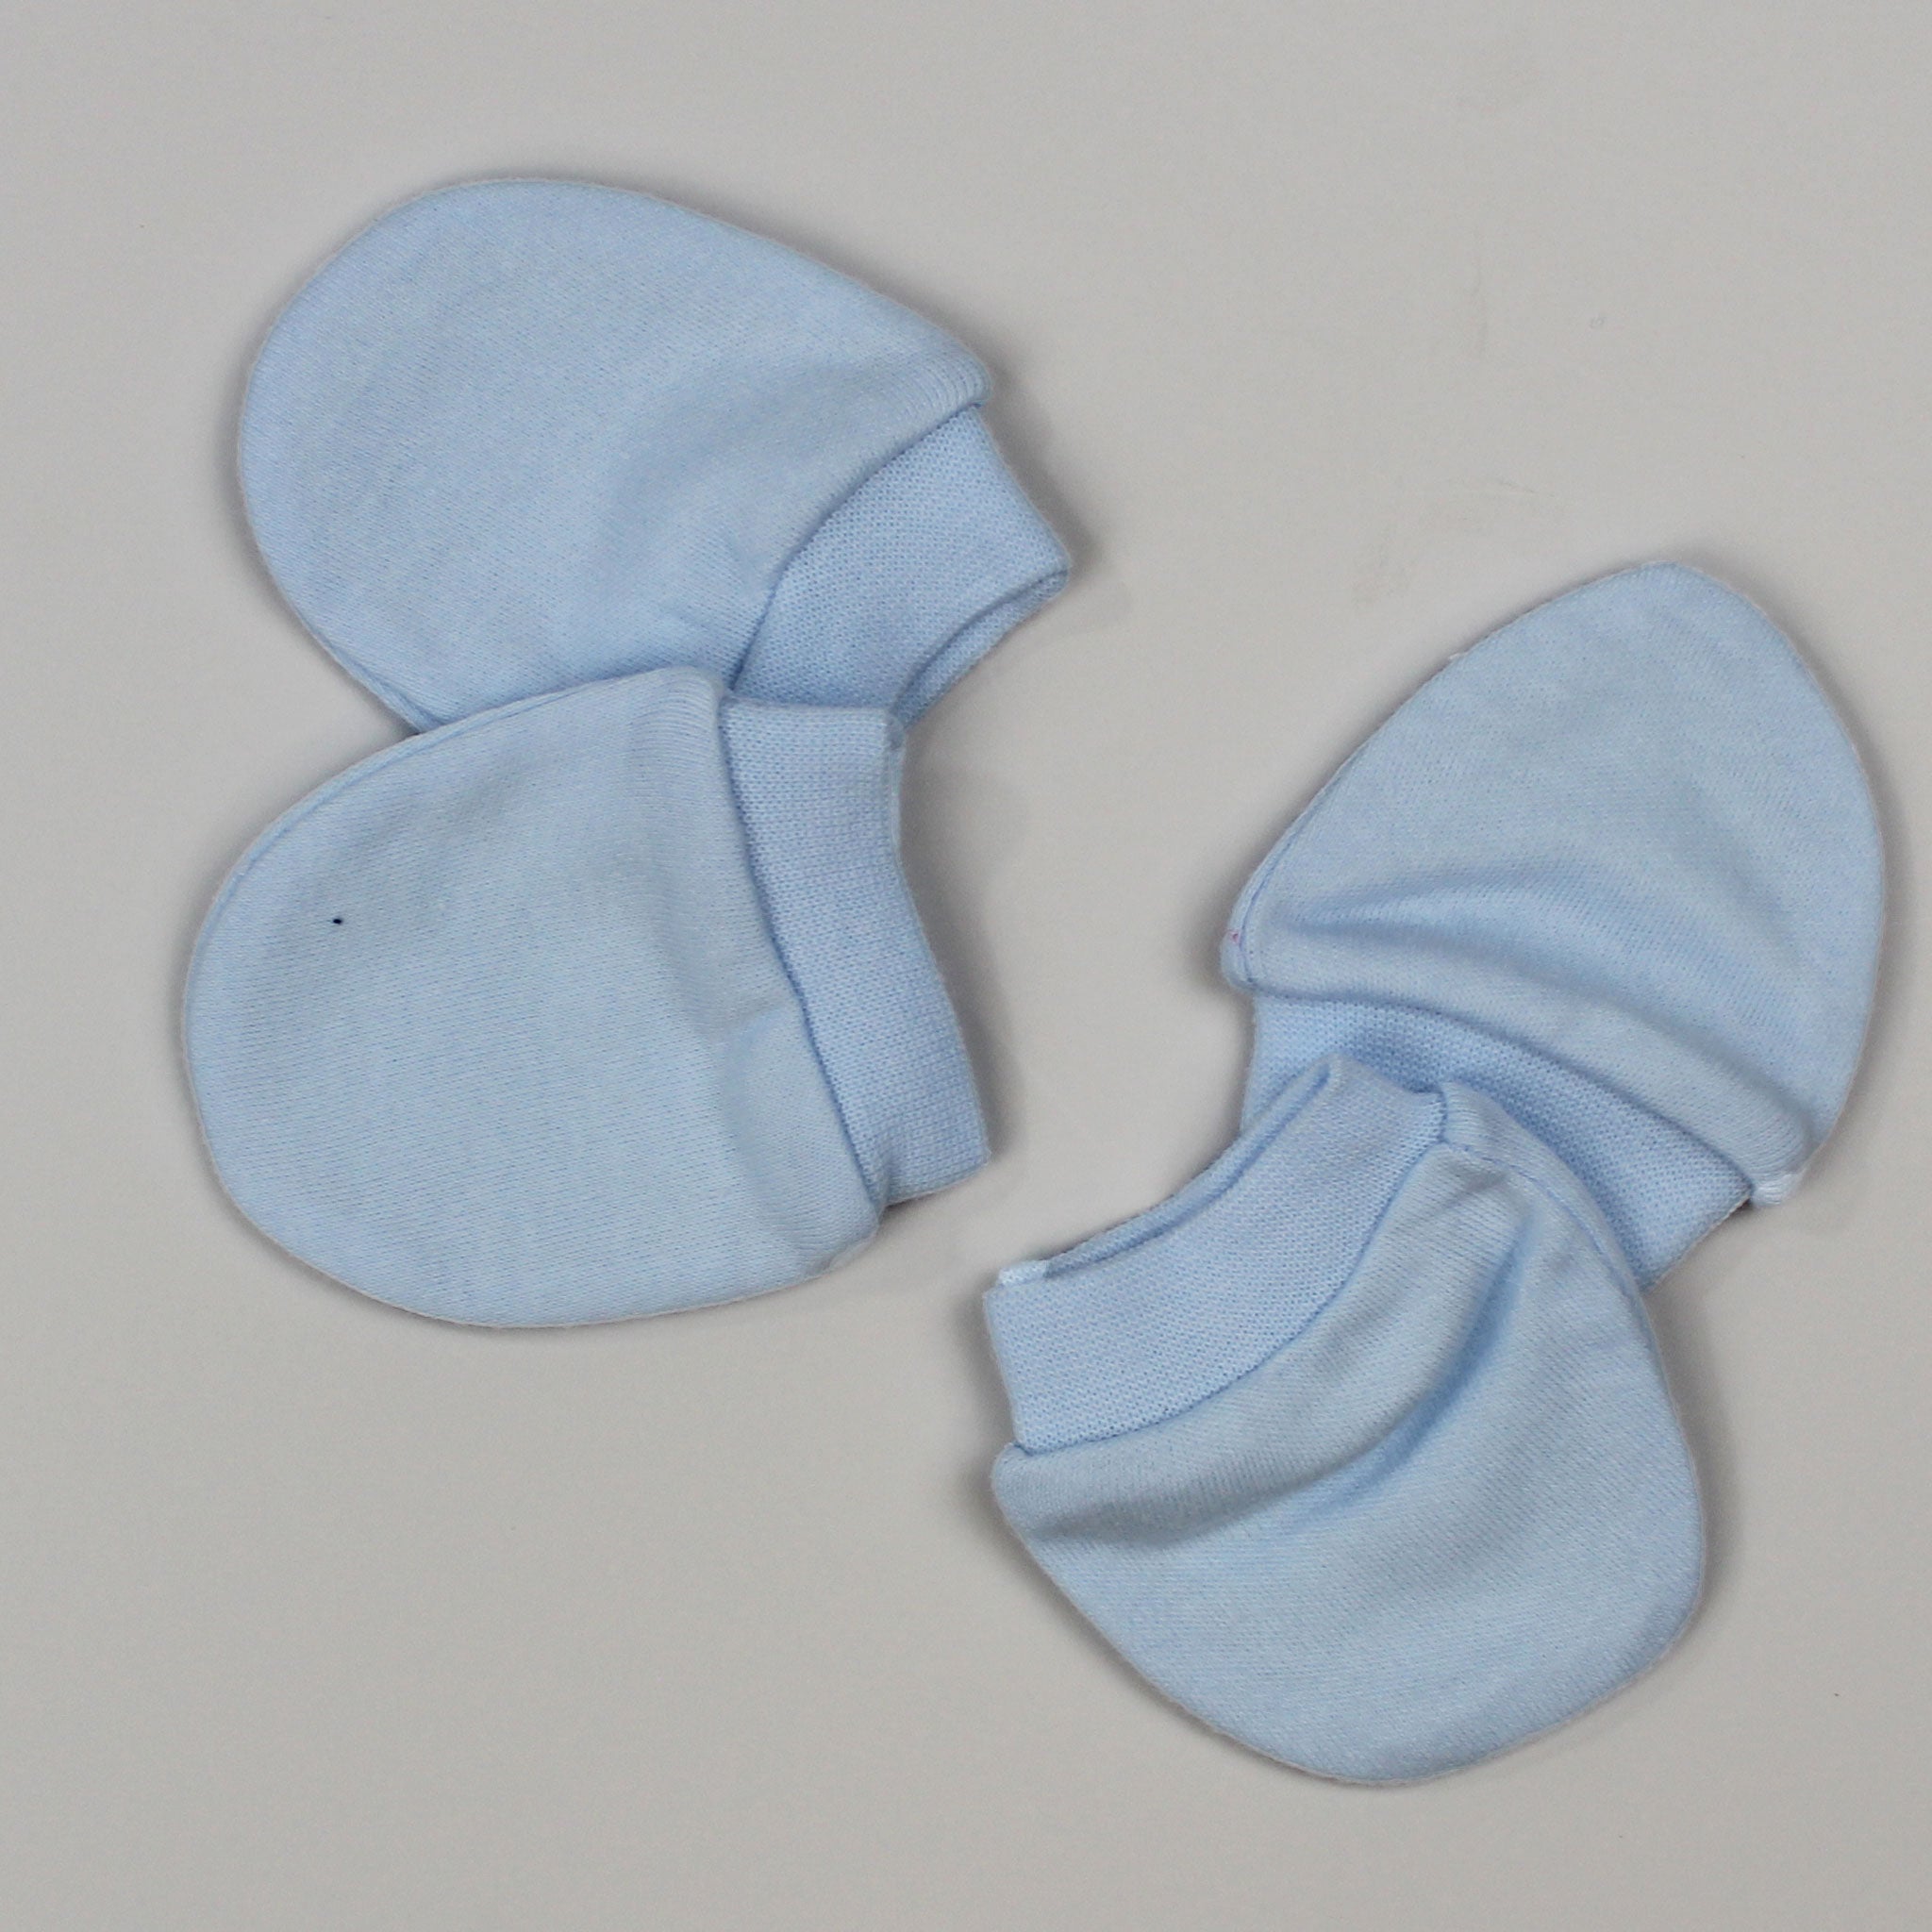 Premature Scratch Mitts- Tiny Baby 2 pack Blue